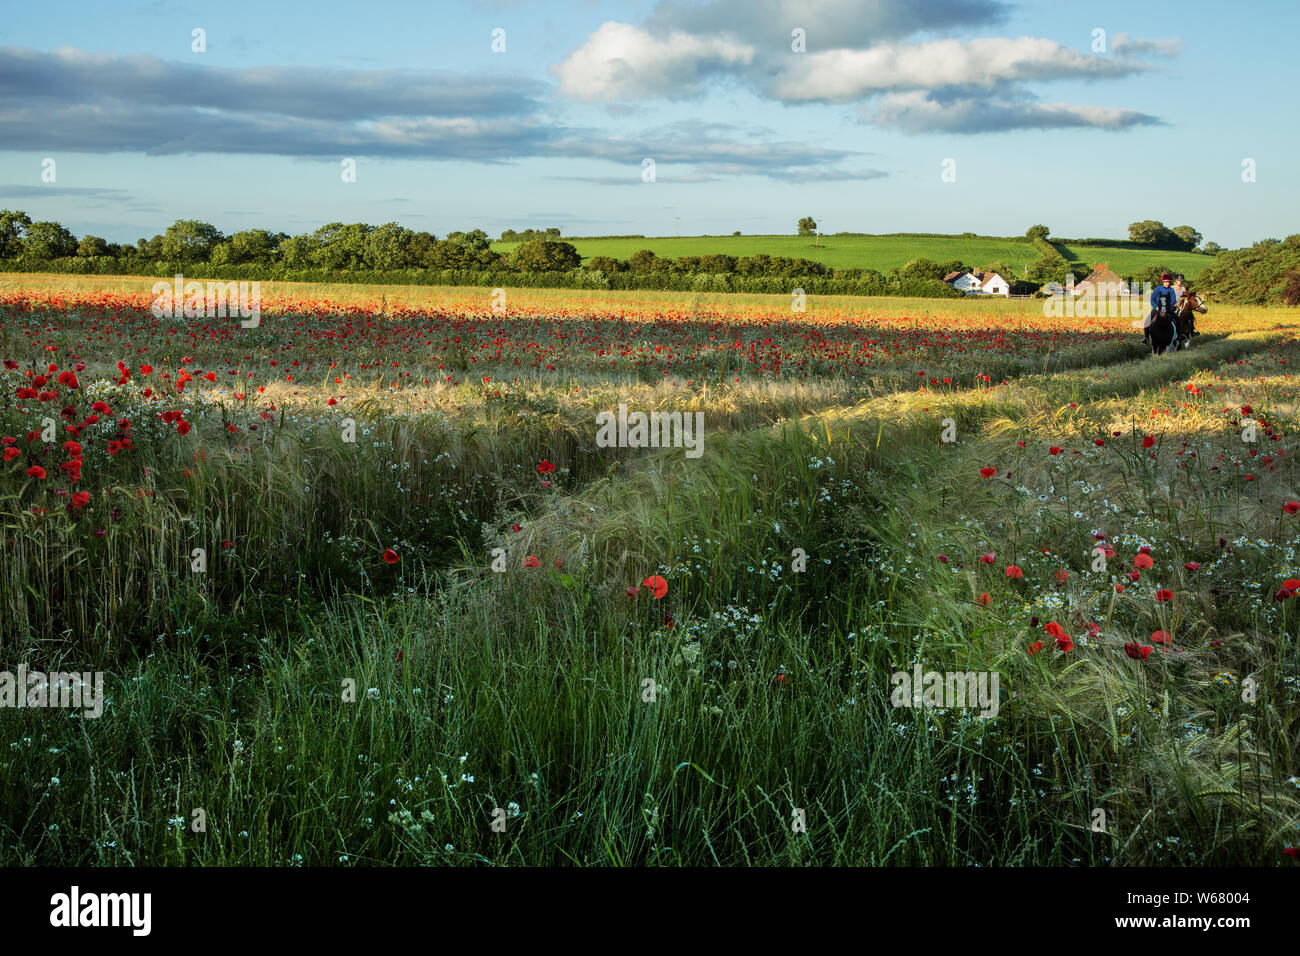 Beautiful rural English landscape with poppy field and bridle path, Gloucestershire, England, UK Stock Photo